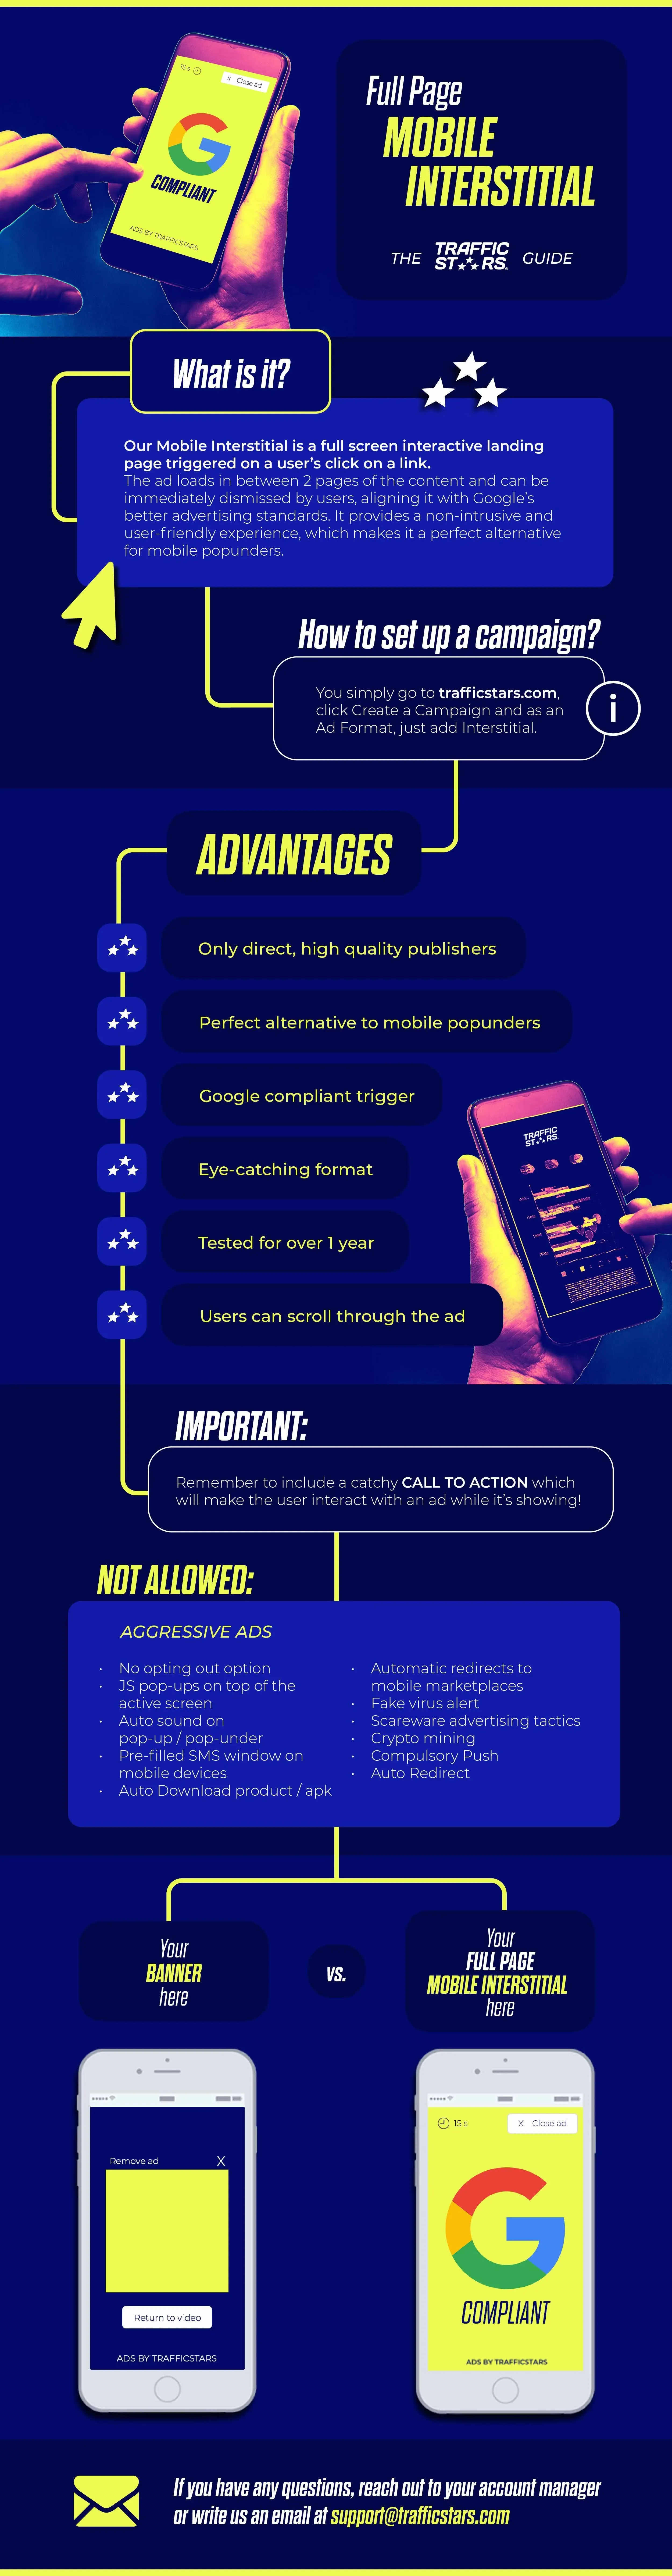 Full-Page-Mobile-Interstitial-Guide-for-advertisers-TrafficStars.webp